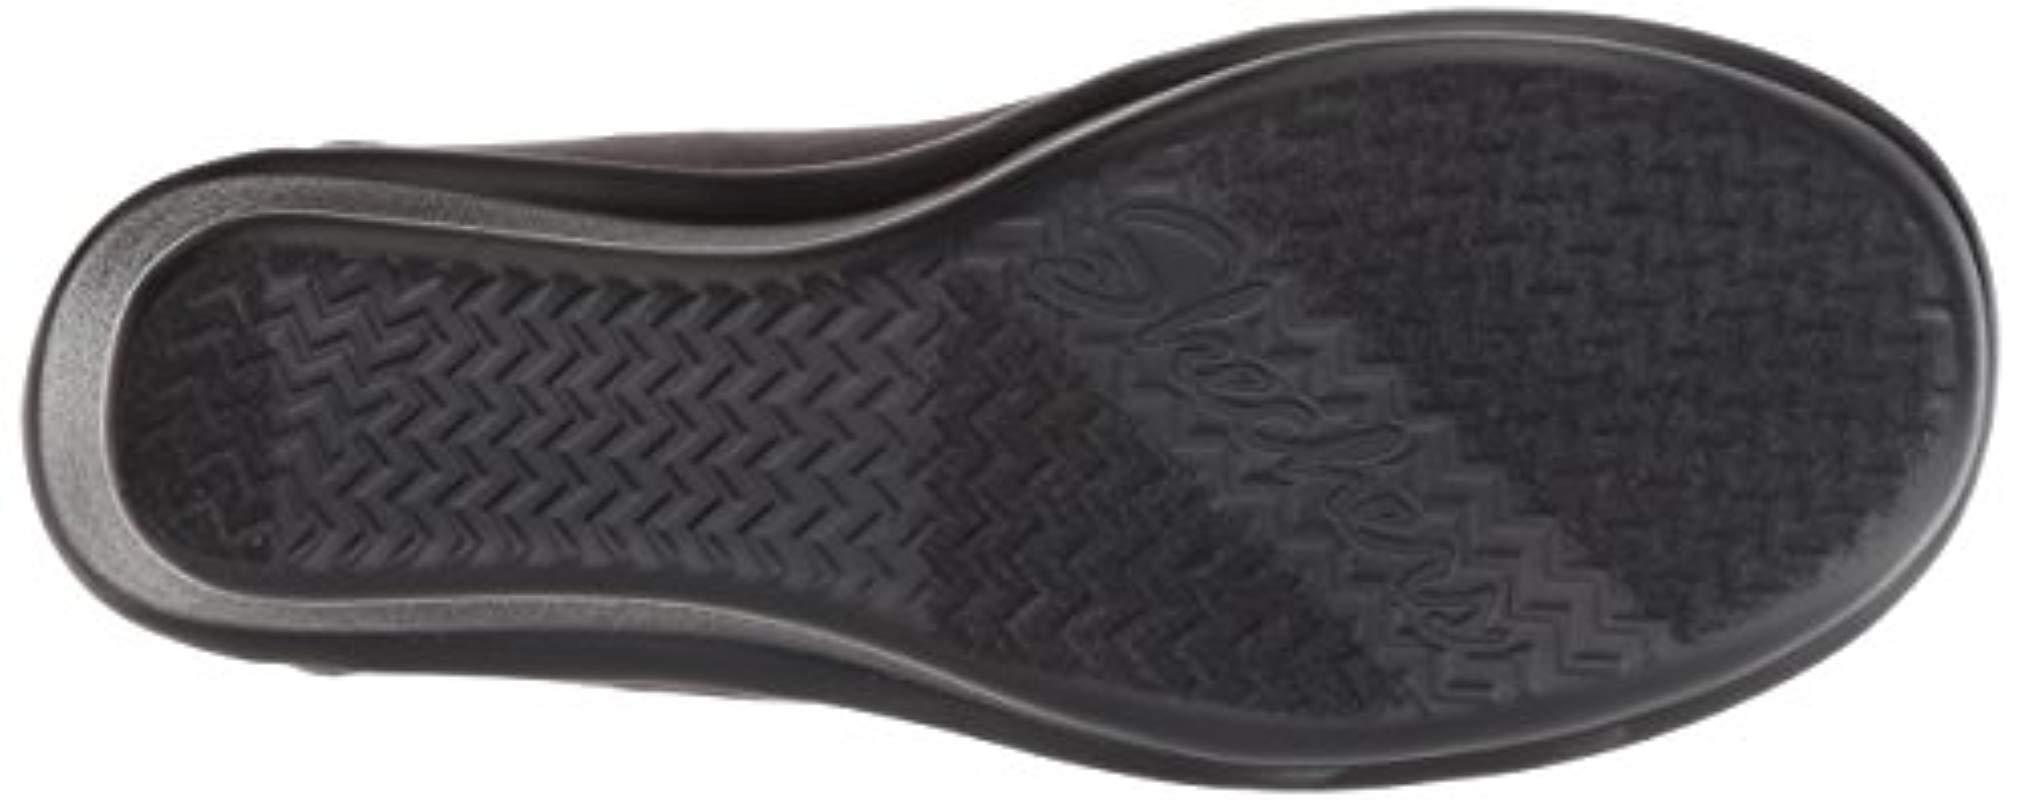 Skechers Rumblers Frilly in Charcoal (Gray) - Lyst